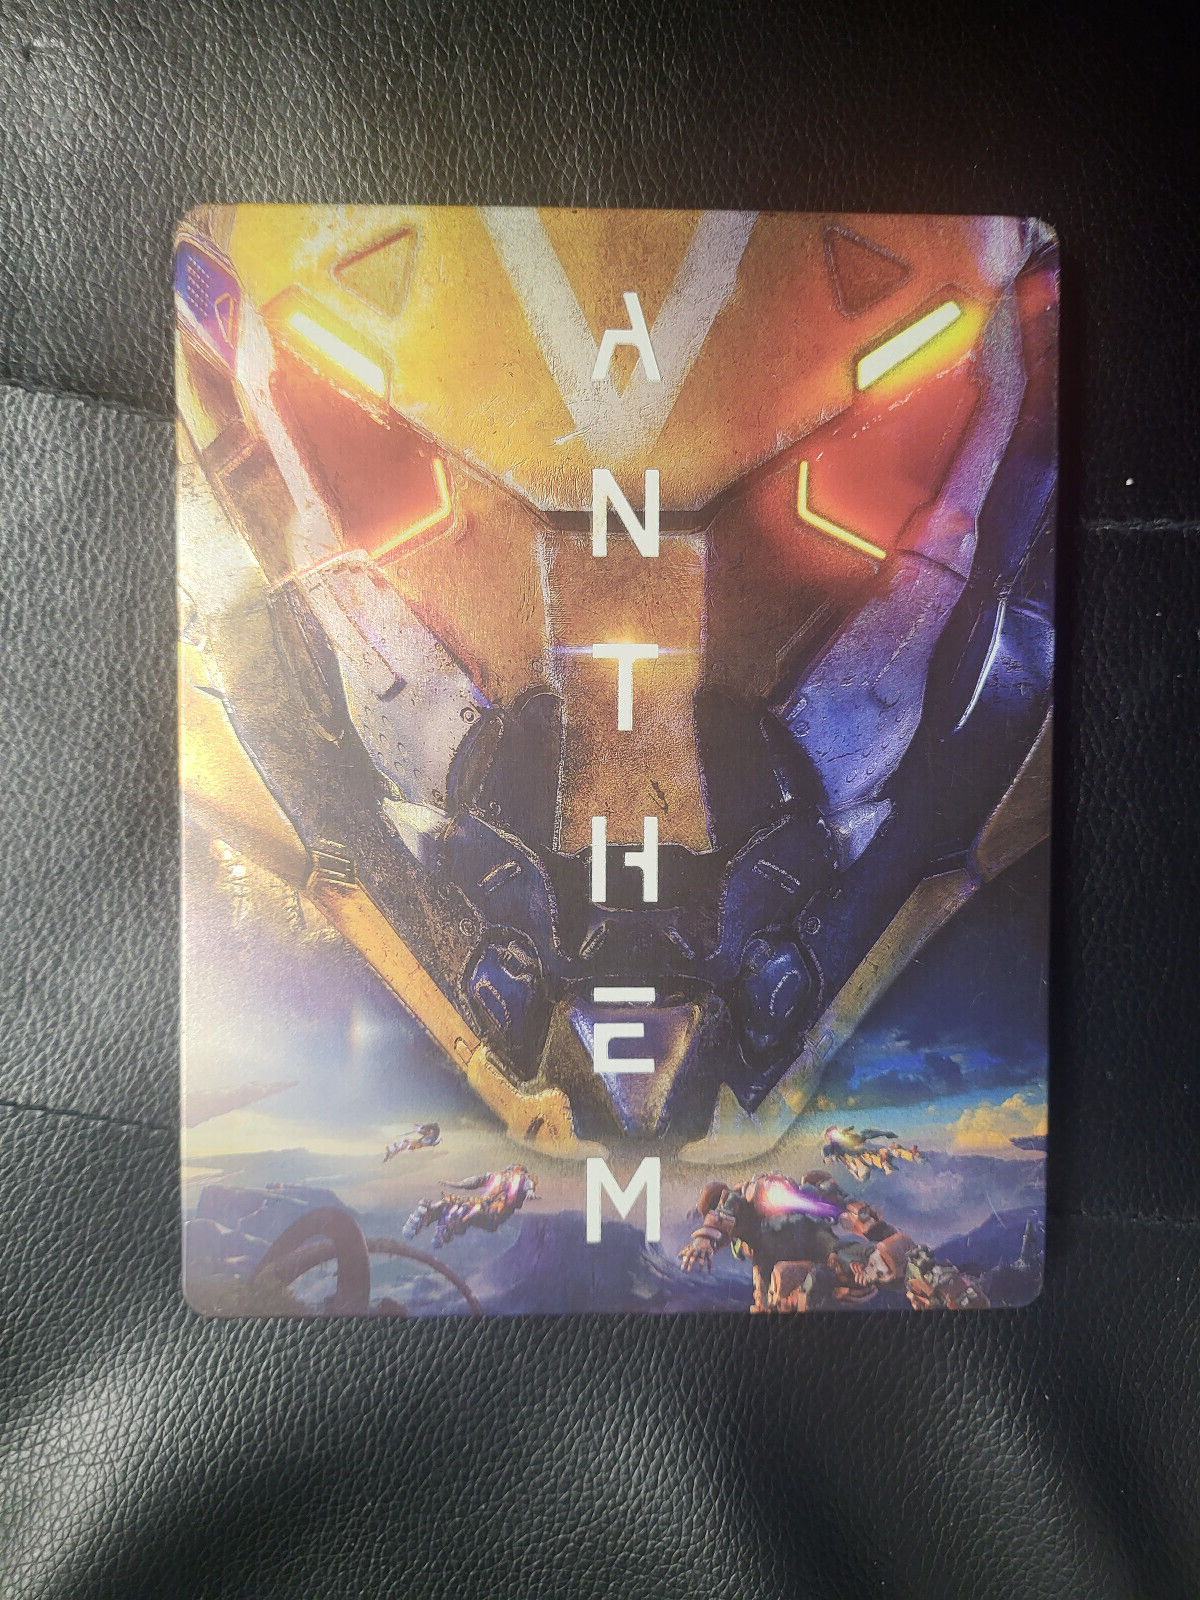 Primary image for Playstation 4 - ANTHEM - Steelbook + Game /PS4 playstation 4 / small dented